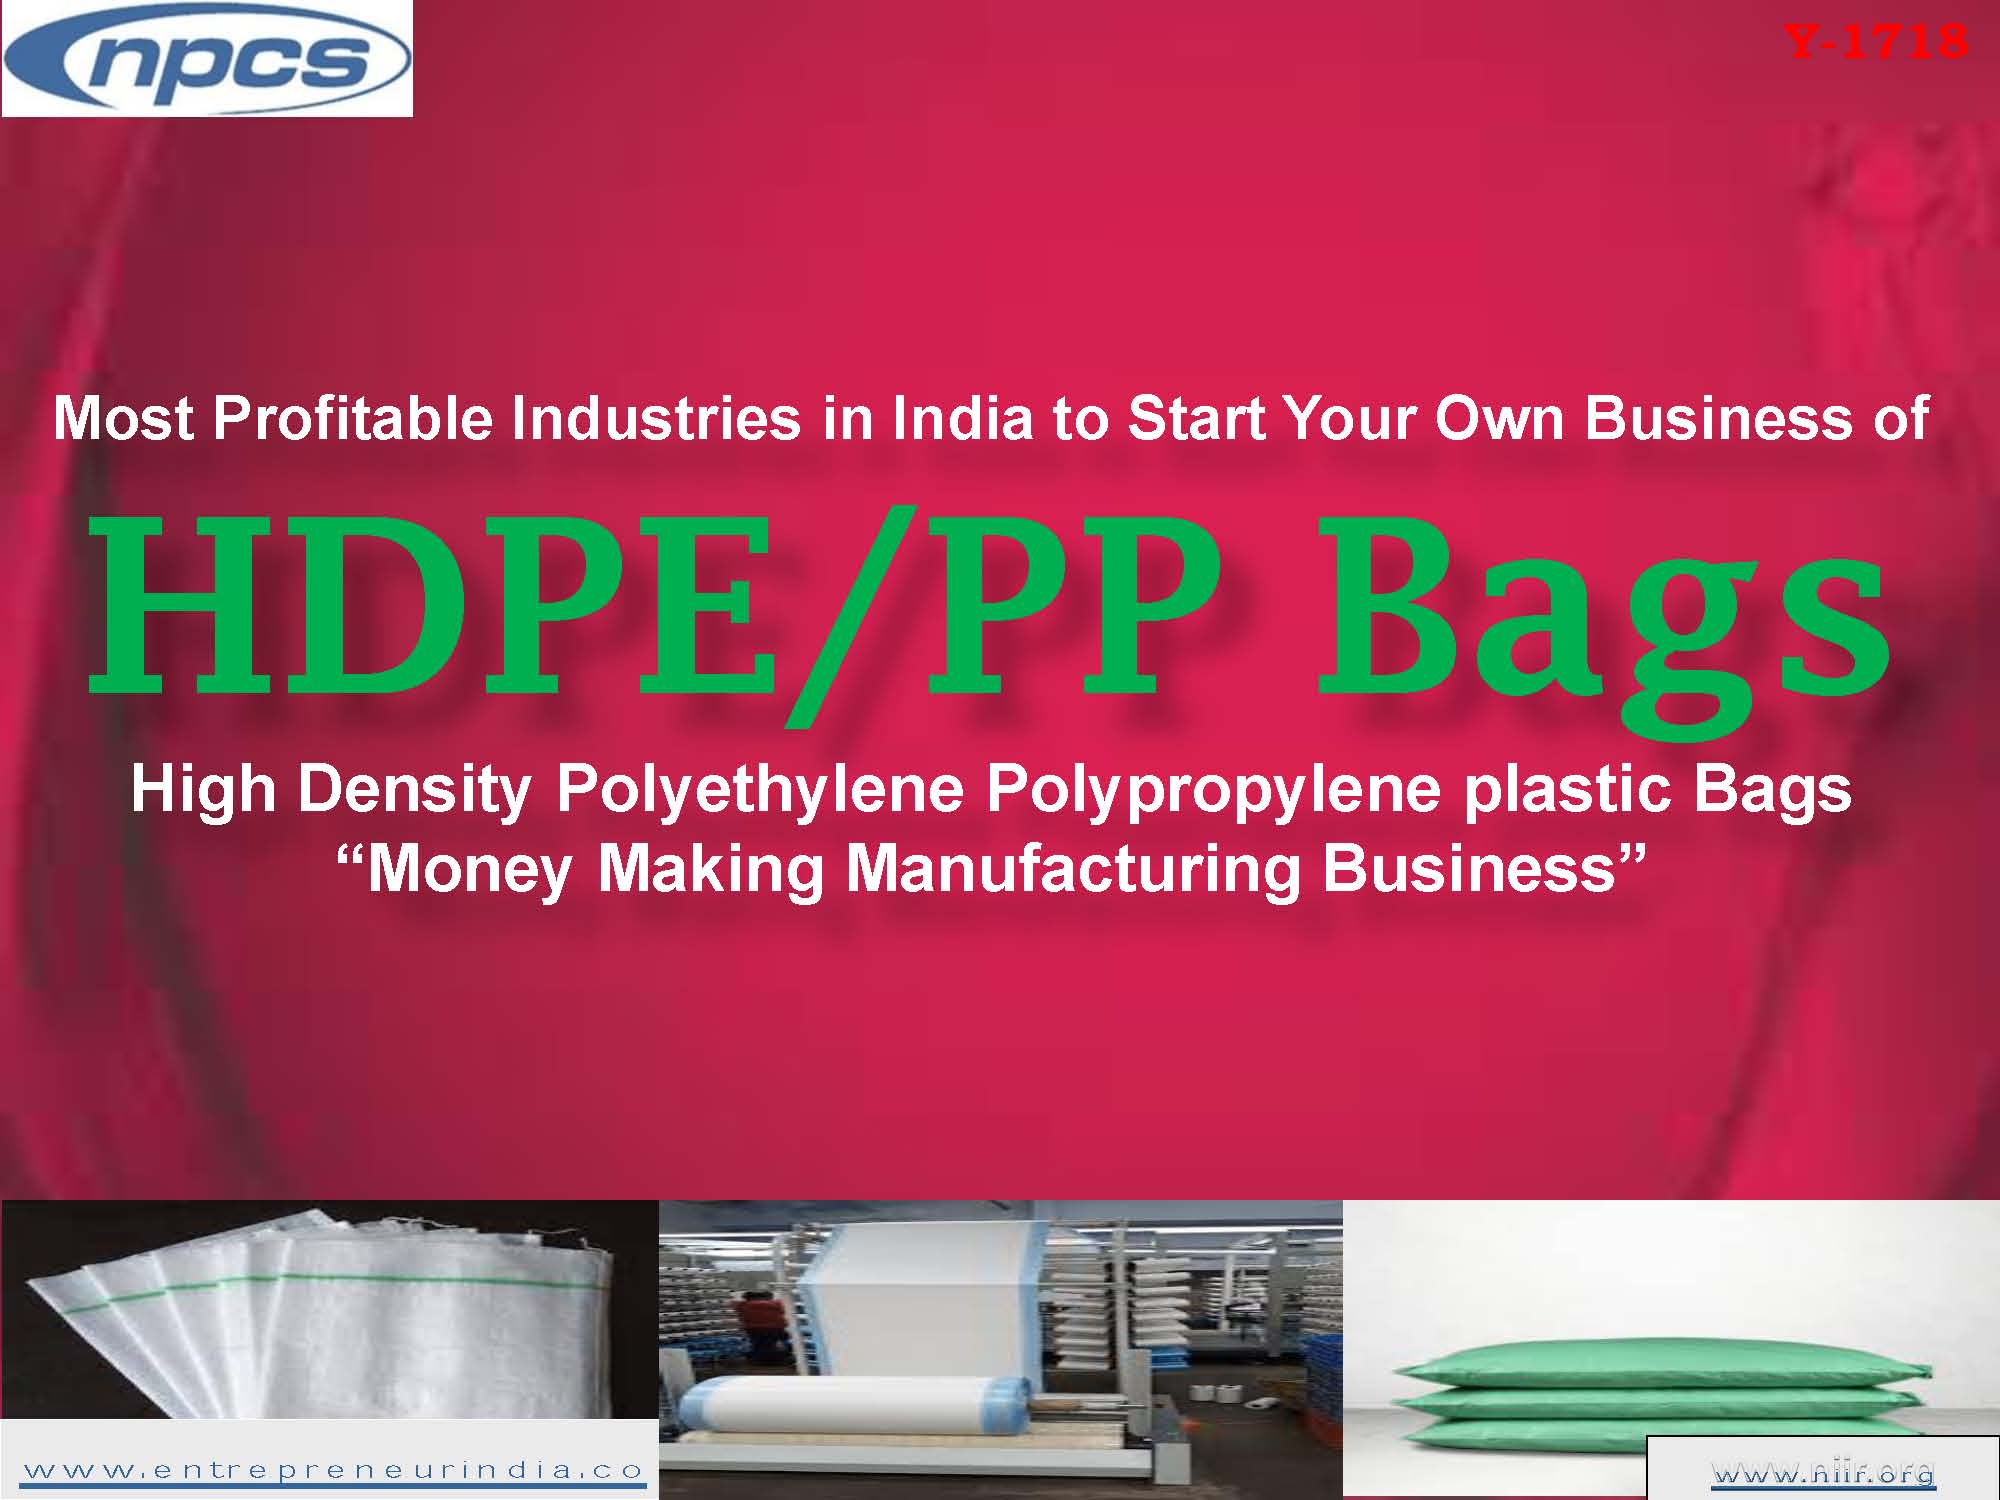 All about HDPE Bags and its Uses for Packaging Industries